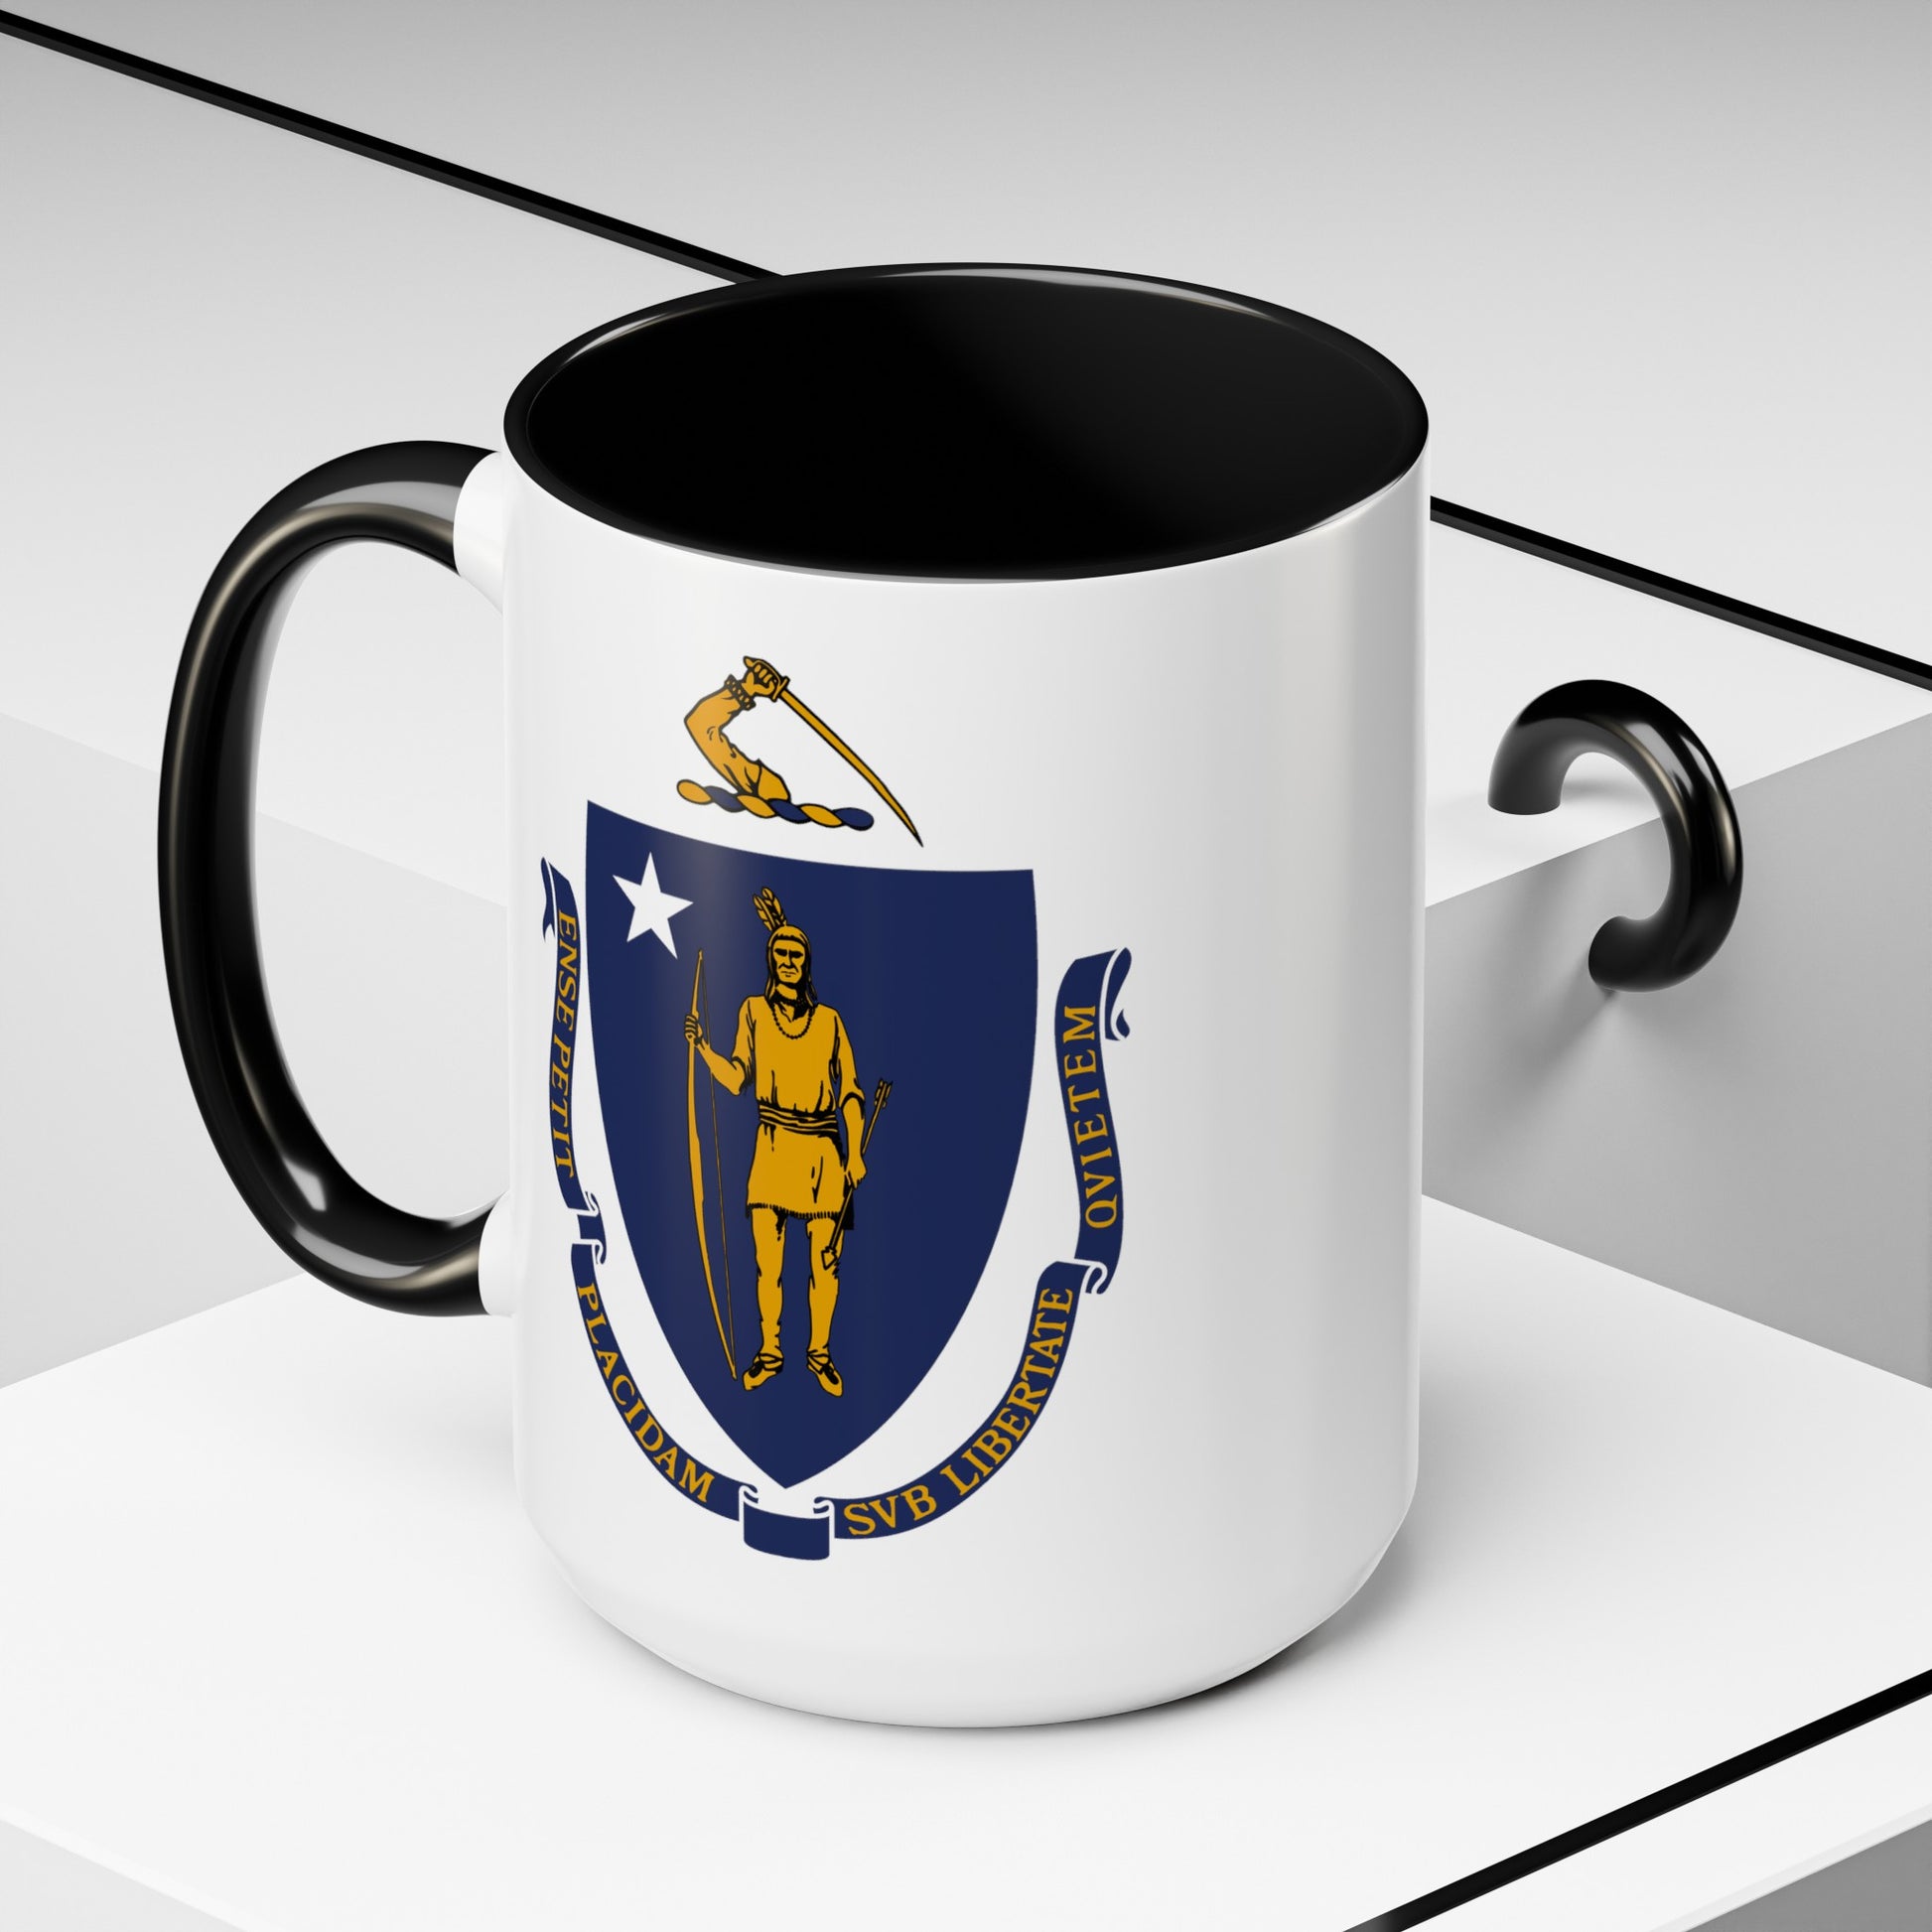 Commonwealth of Massachusetts State Flag - Double Sided Black Accent White Ceramic Coffee Mug 15oz by TheGlassyLass.com